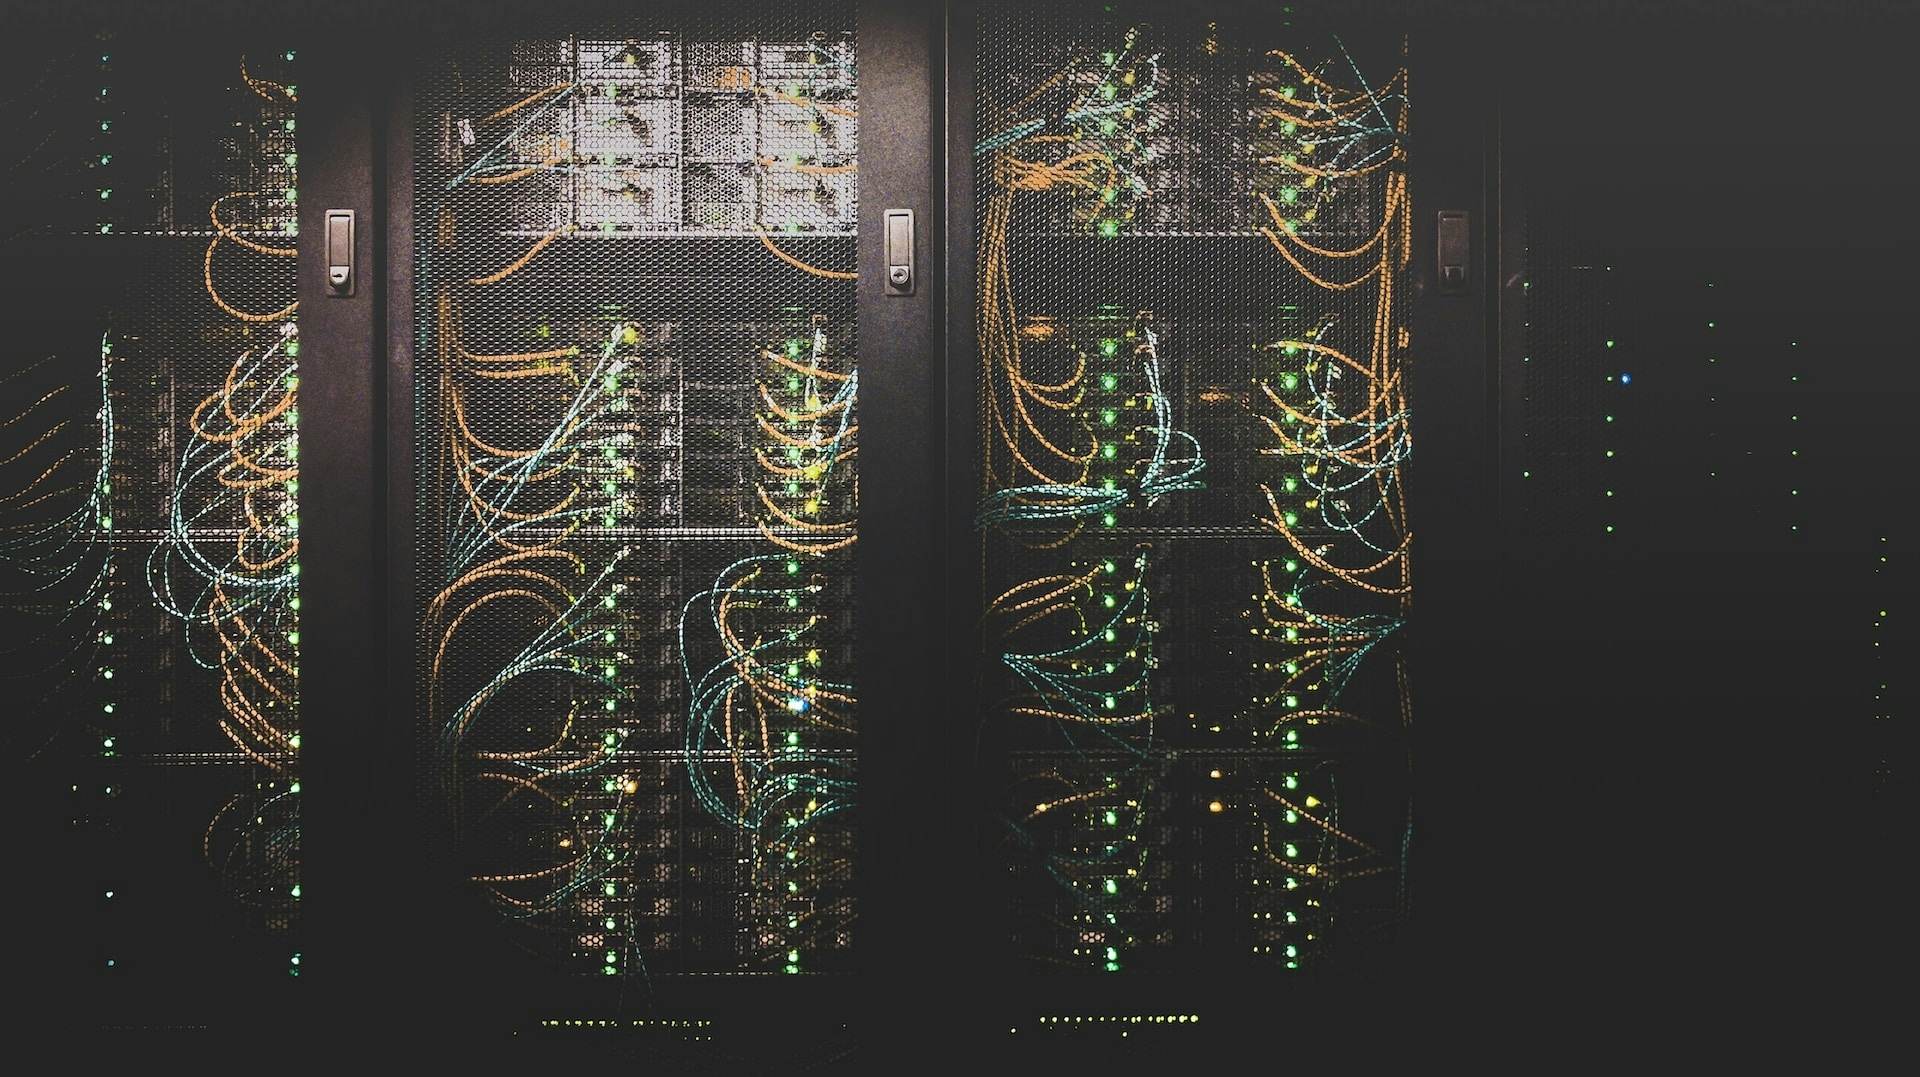 An image of multiple servers in a dark room.